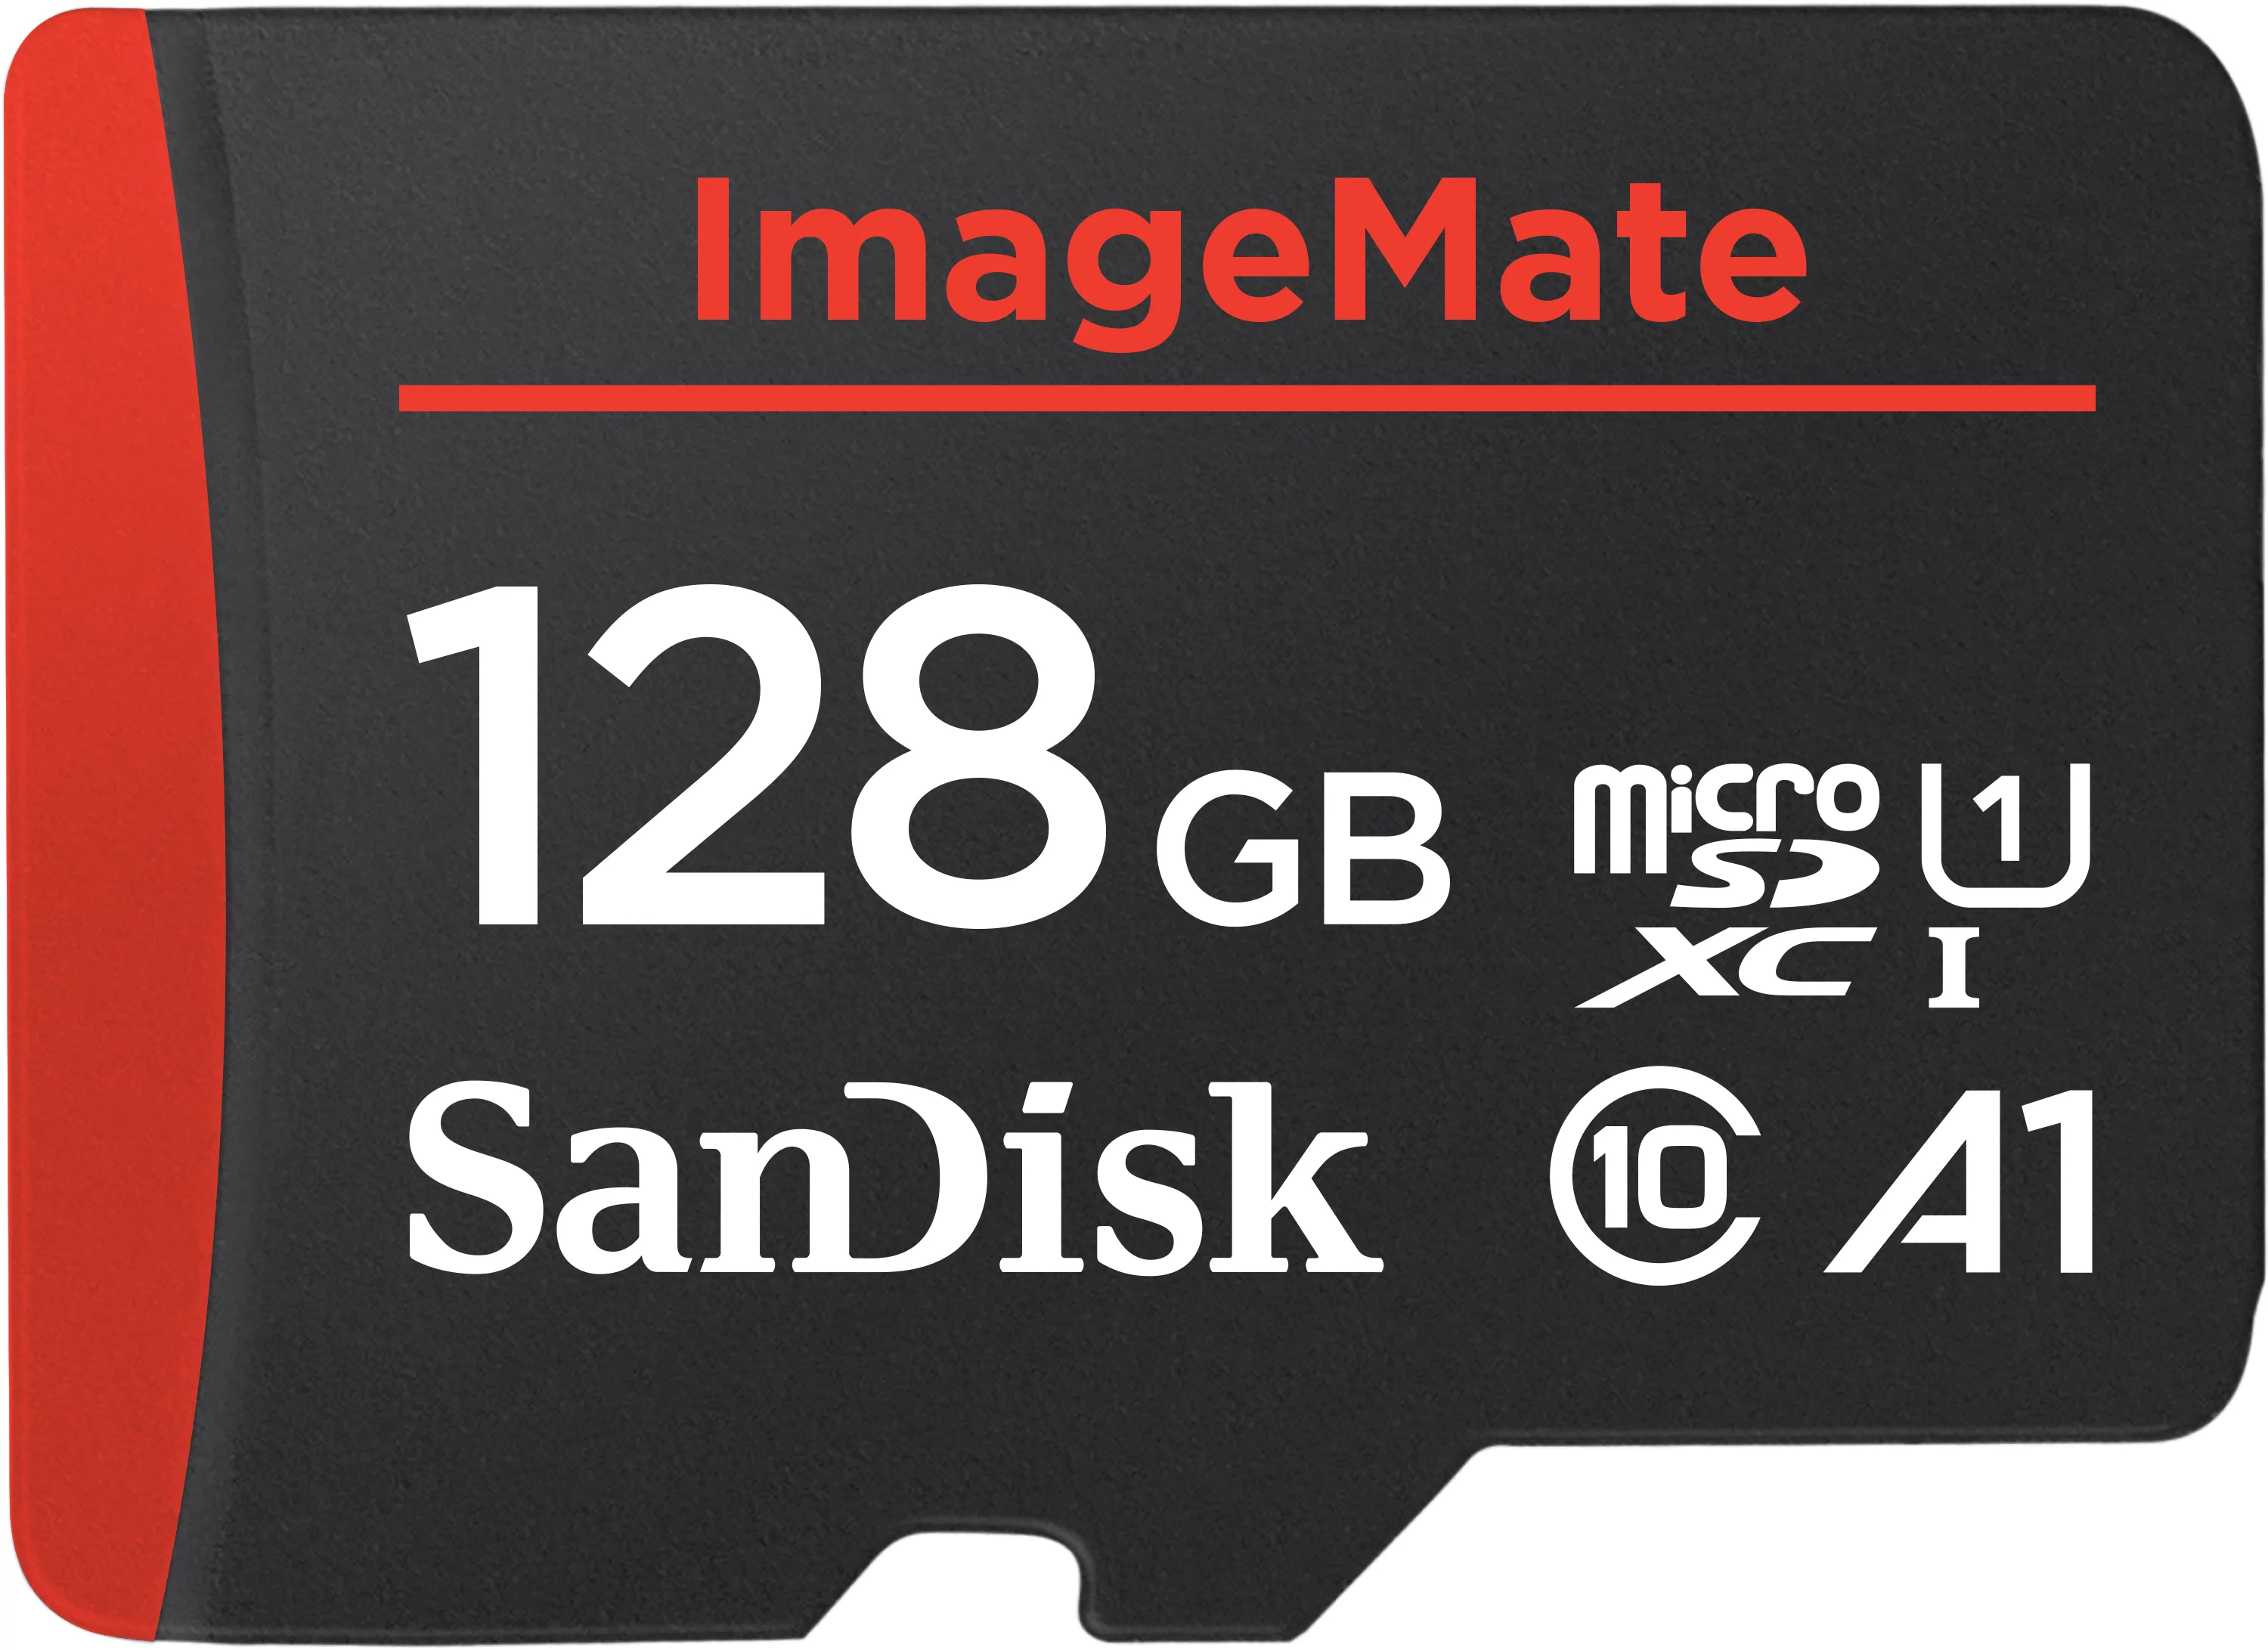 SanDisk 128 GB ImageMate microSDXC UHS-1 Memory Card with Adapter - C10, U1, Full HD, A1 Micro SD Card